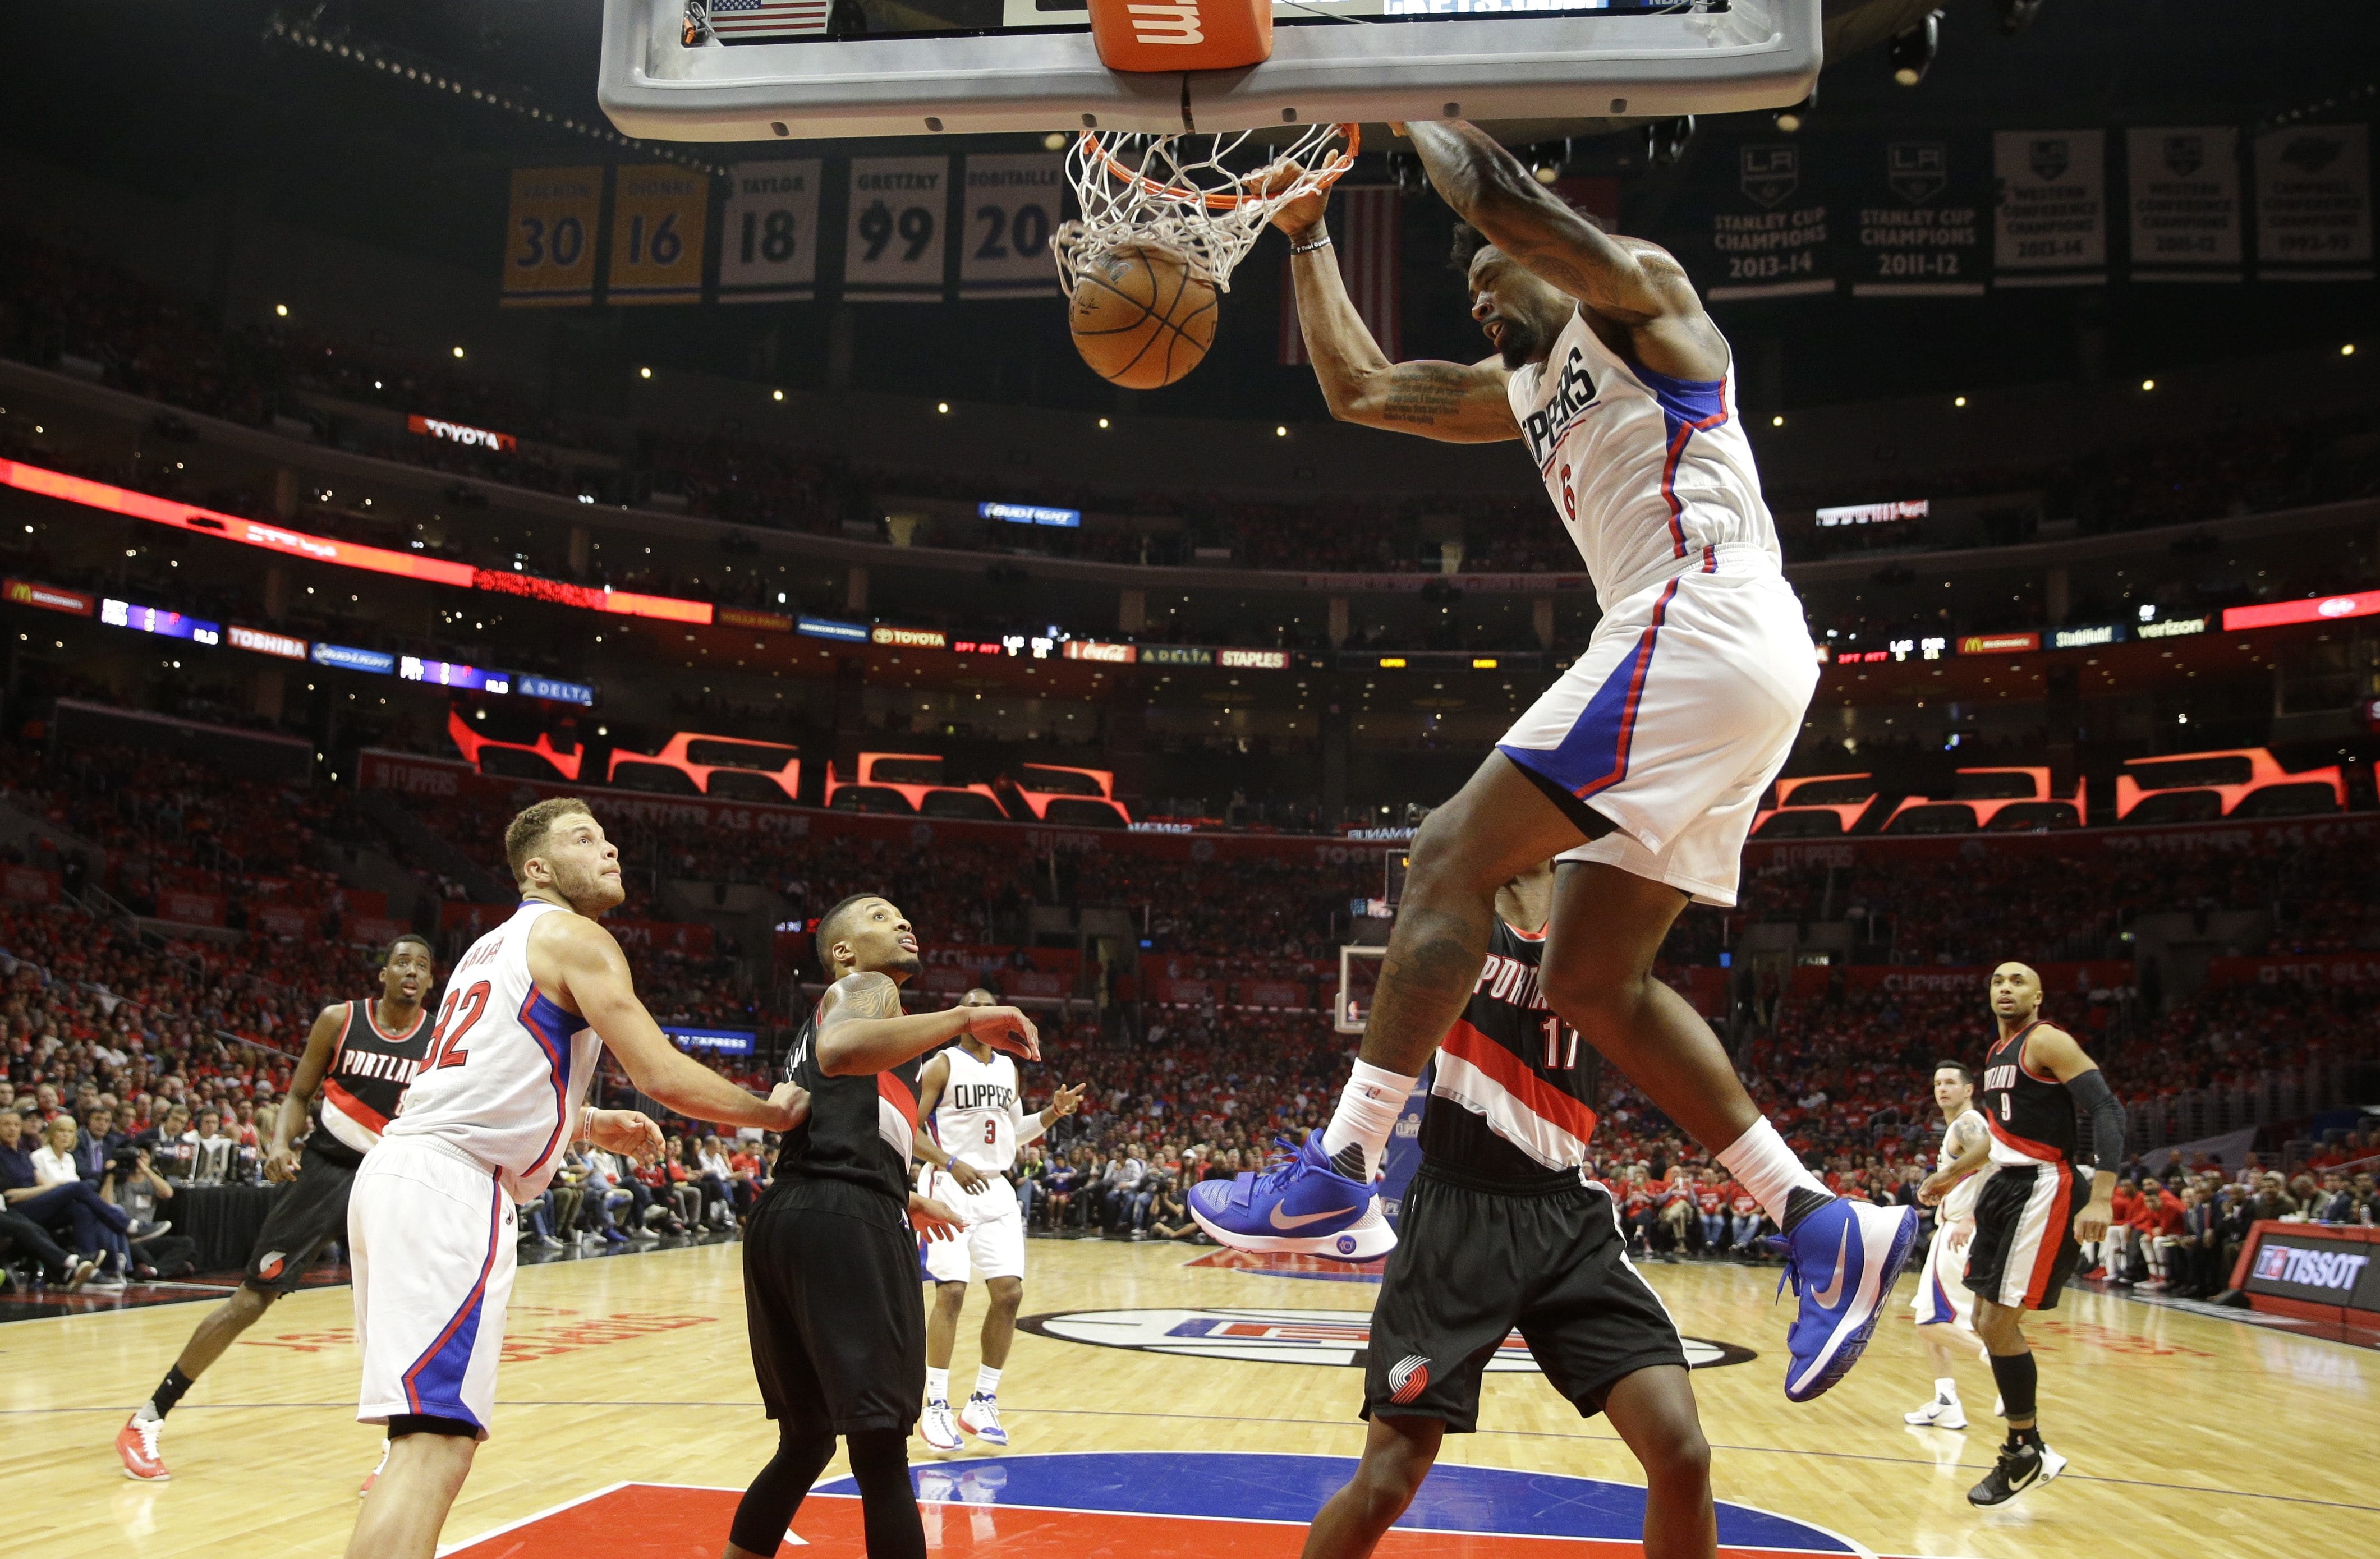 Los Angeles Clippers' DeAndre Jordan, top, dunks as teammate Blake Griffin, left, and Portland Trail Blazers' Damian Lillard watch in the second half in Game 1 of a first-round NBA basketball playoff series, on Sunday, April 17, 2016, in Los Angeles. The Clippers won 115-95. (AP Photo/Jae C.